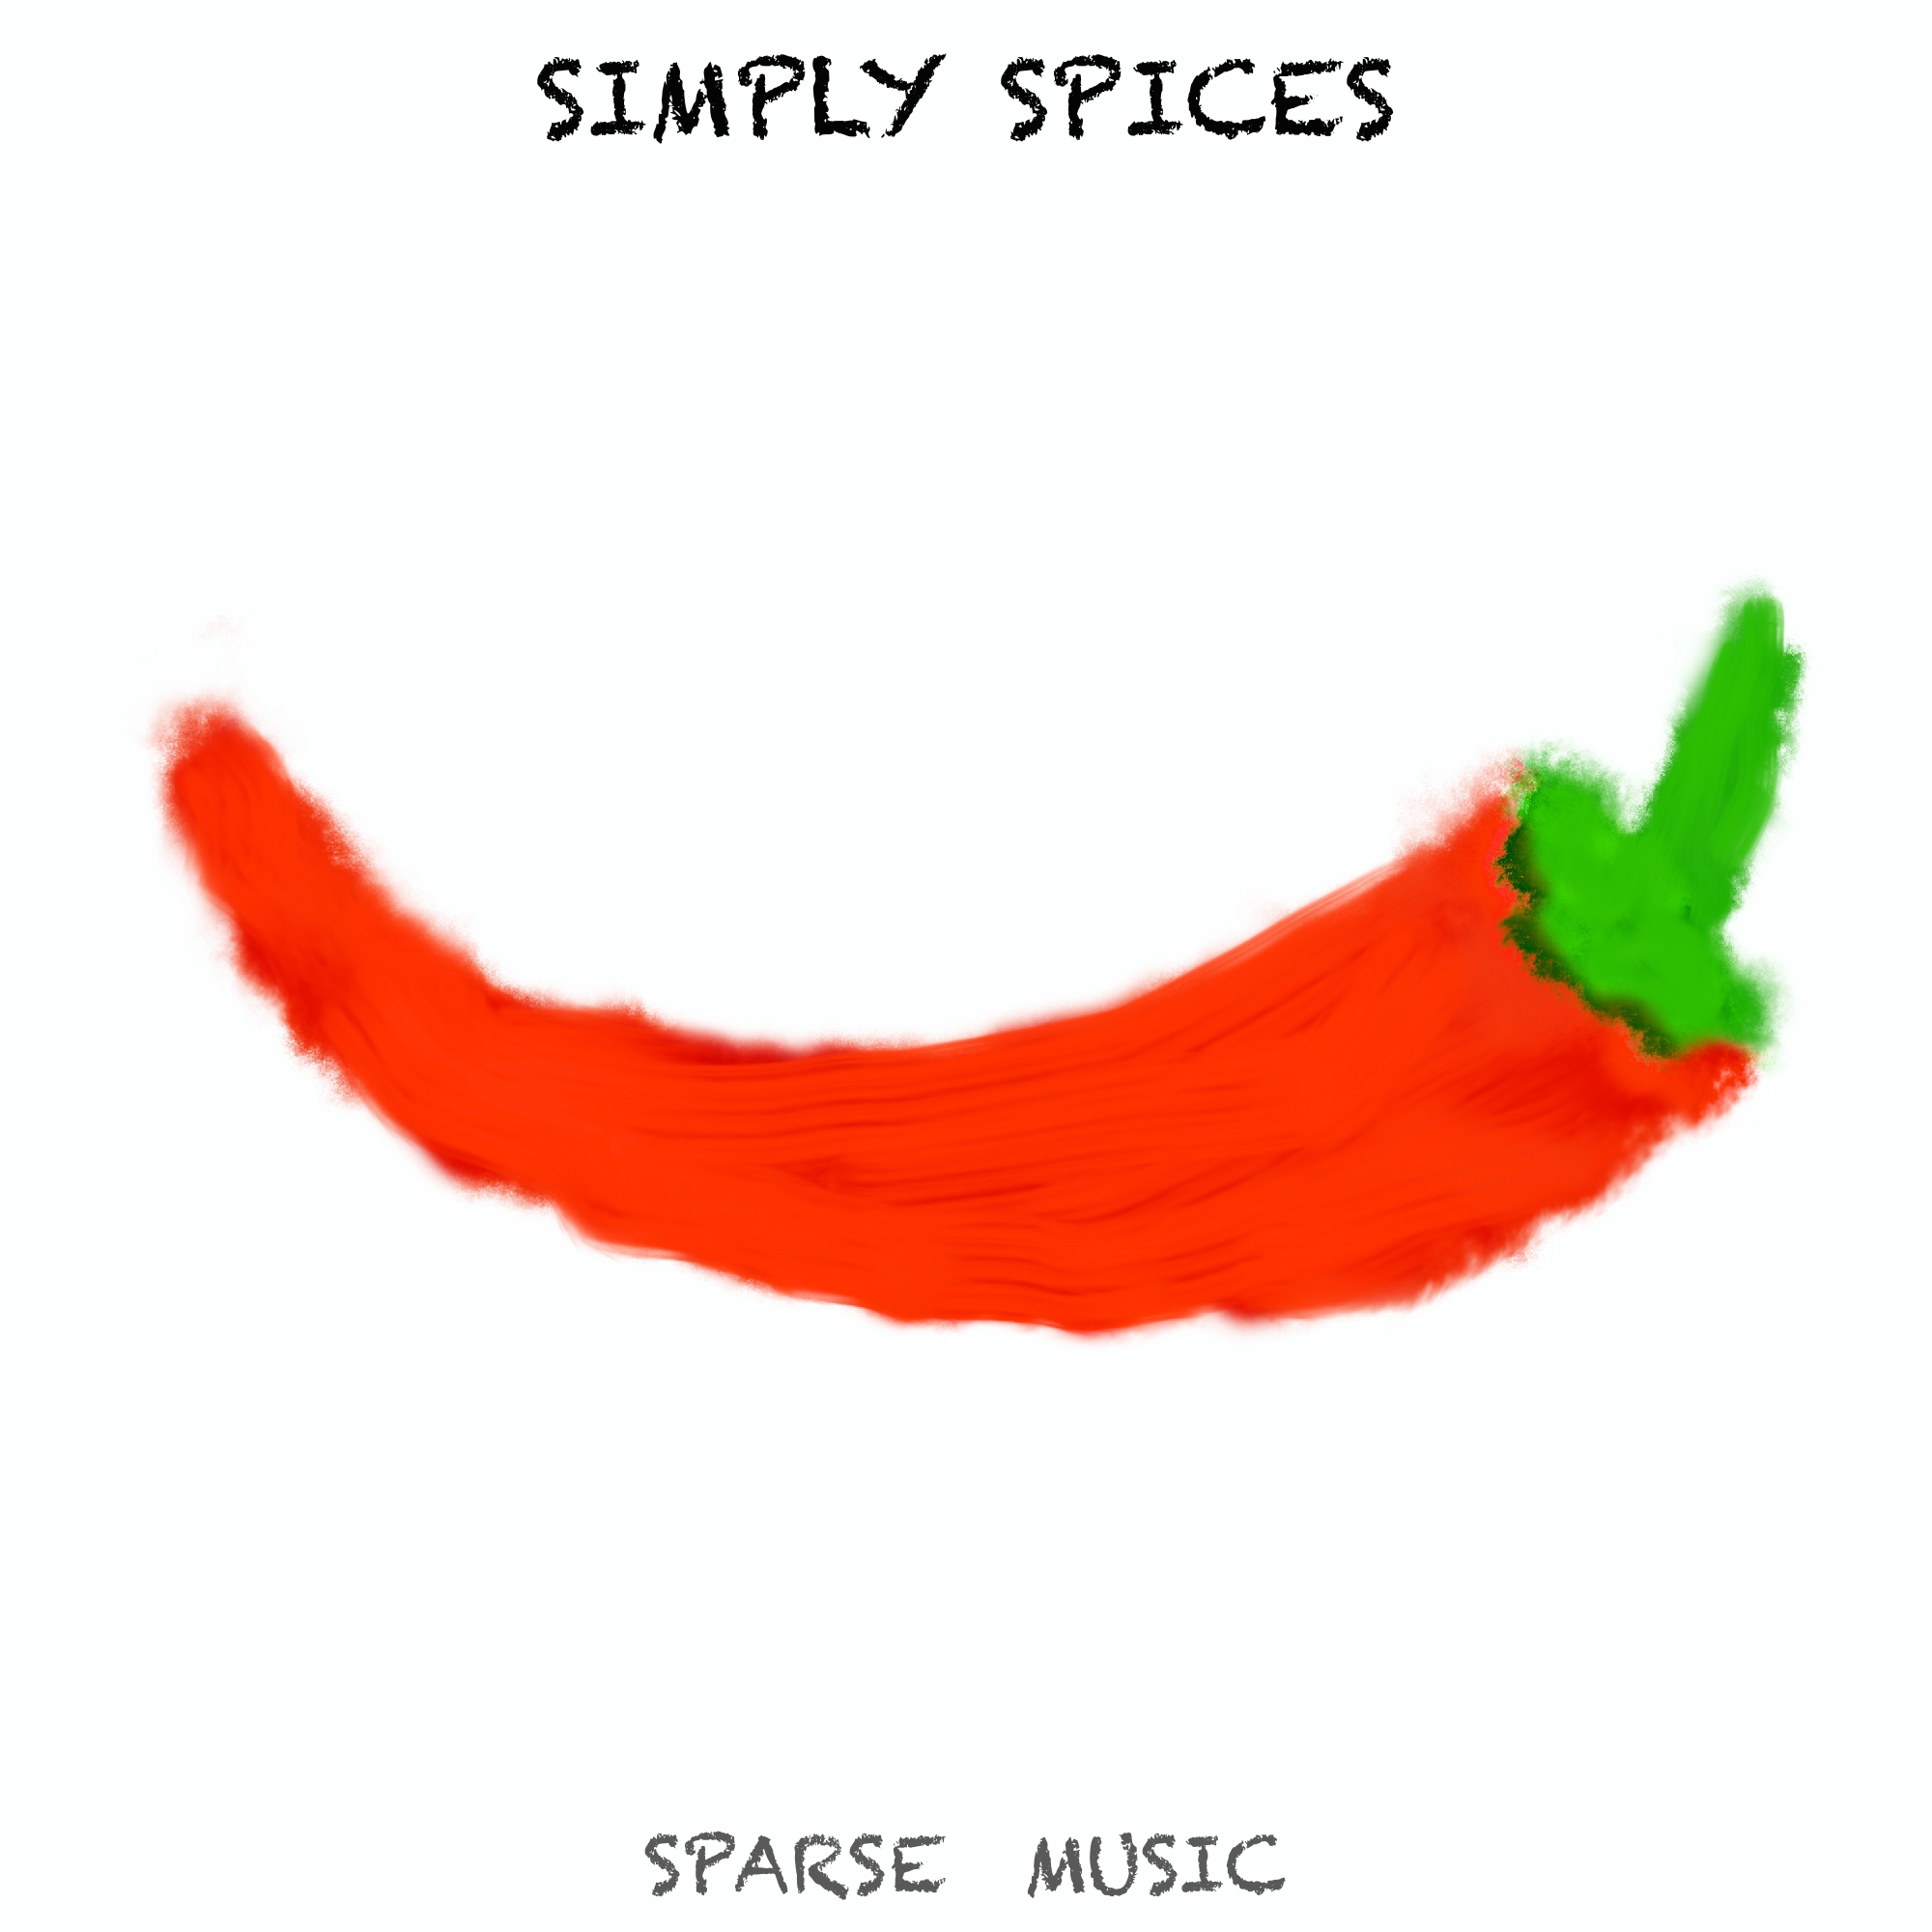 SPRS 01097 SIMPLY SPICES 2000